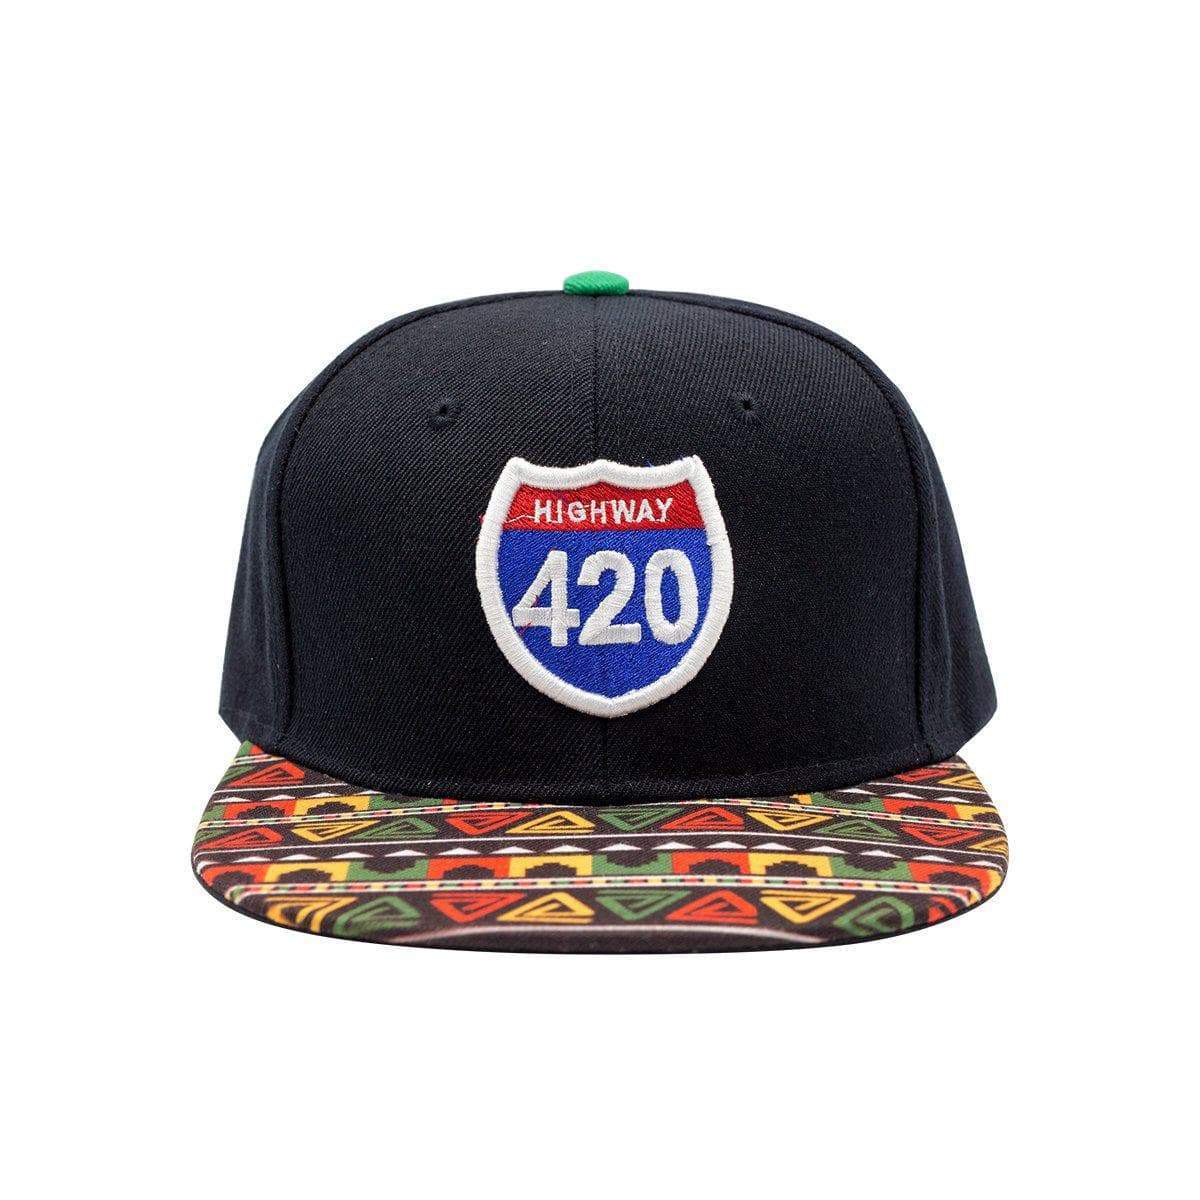 Dope and stylish 420 highway snapback cap fashion apparel with weed leef pot funky rasta design